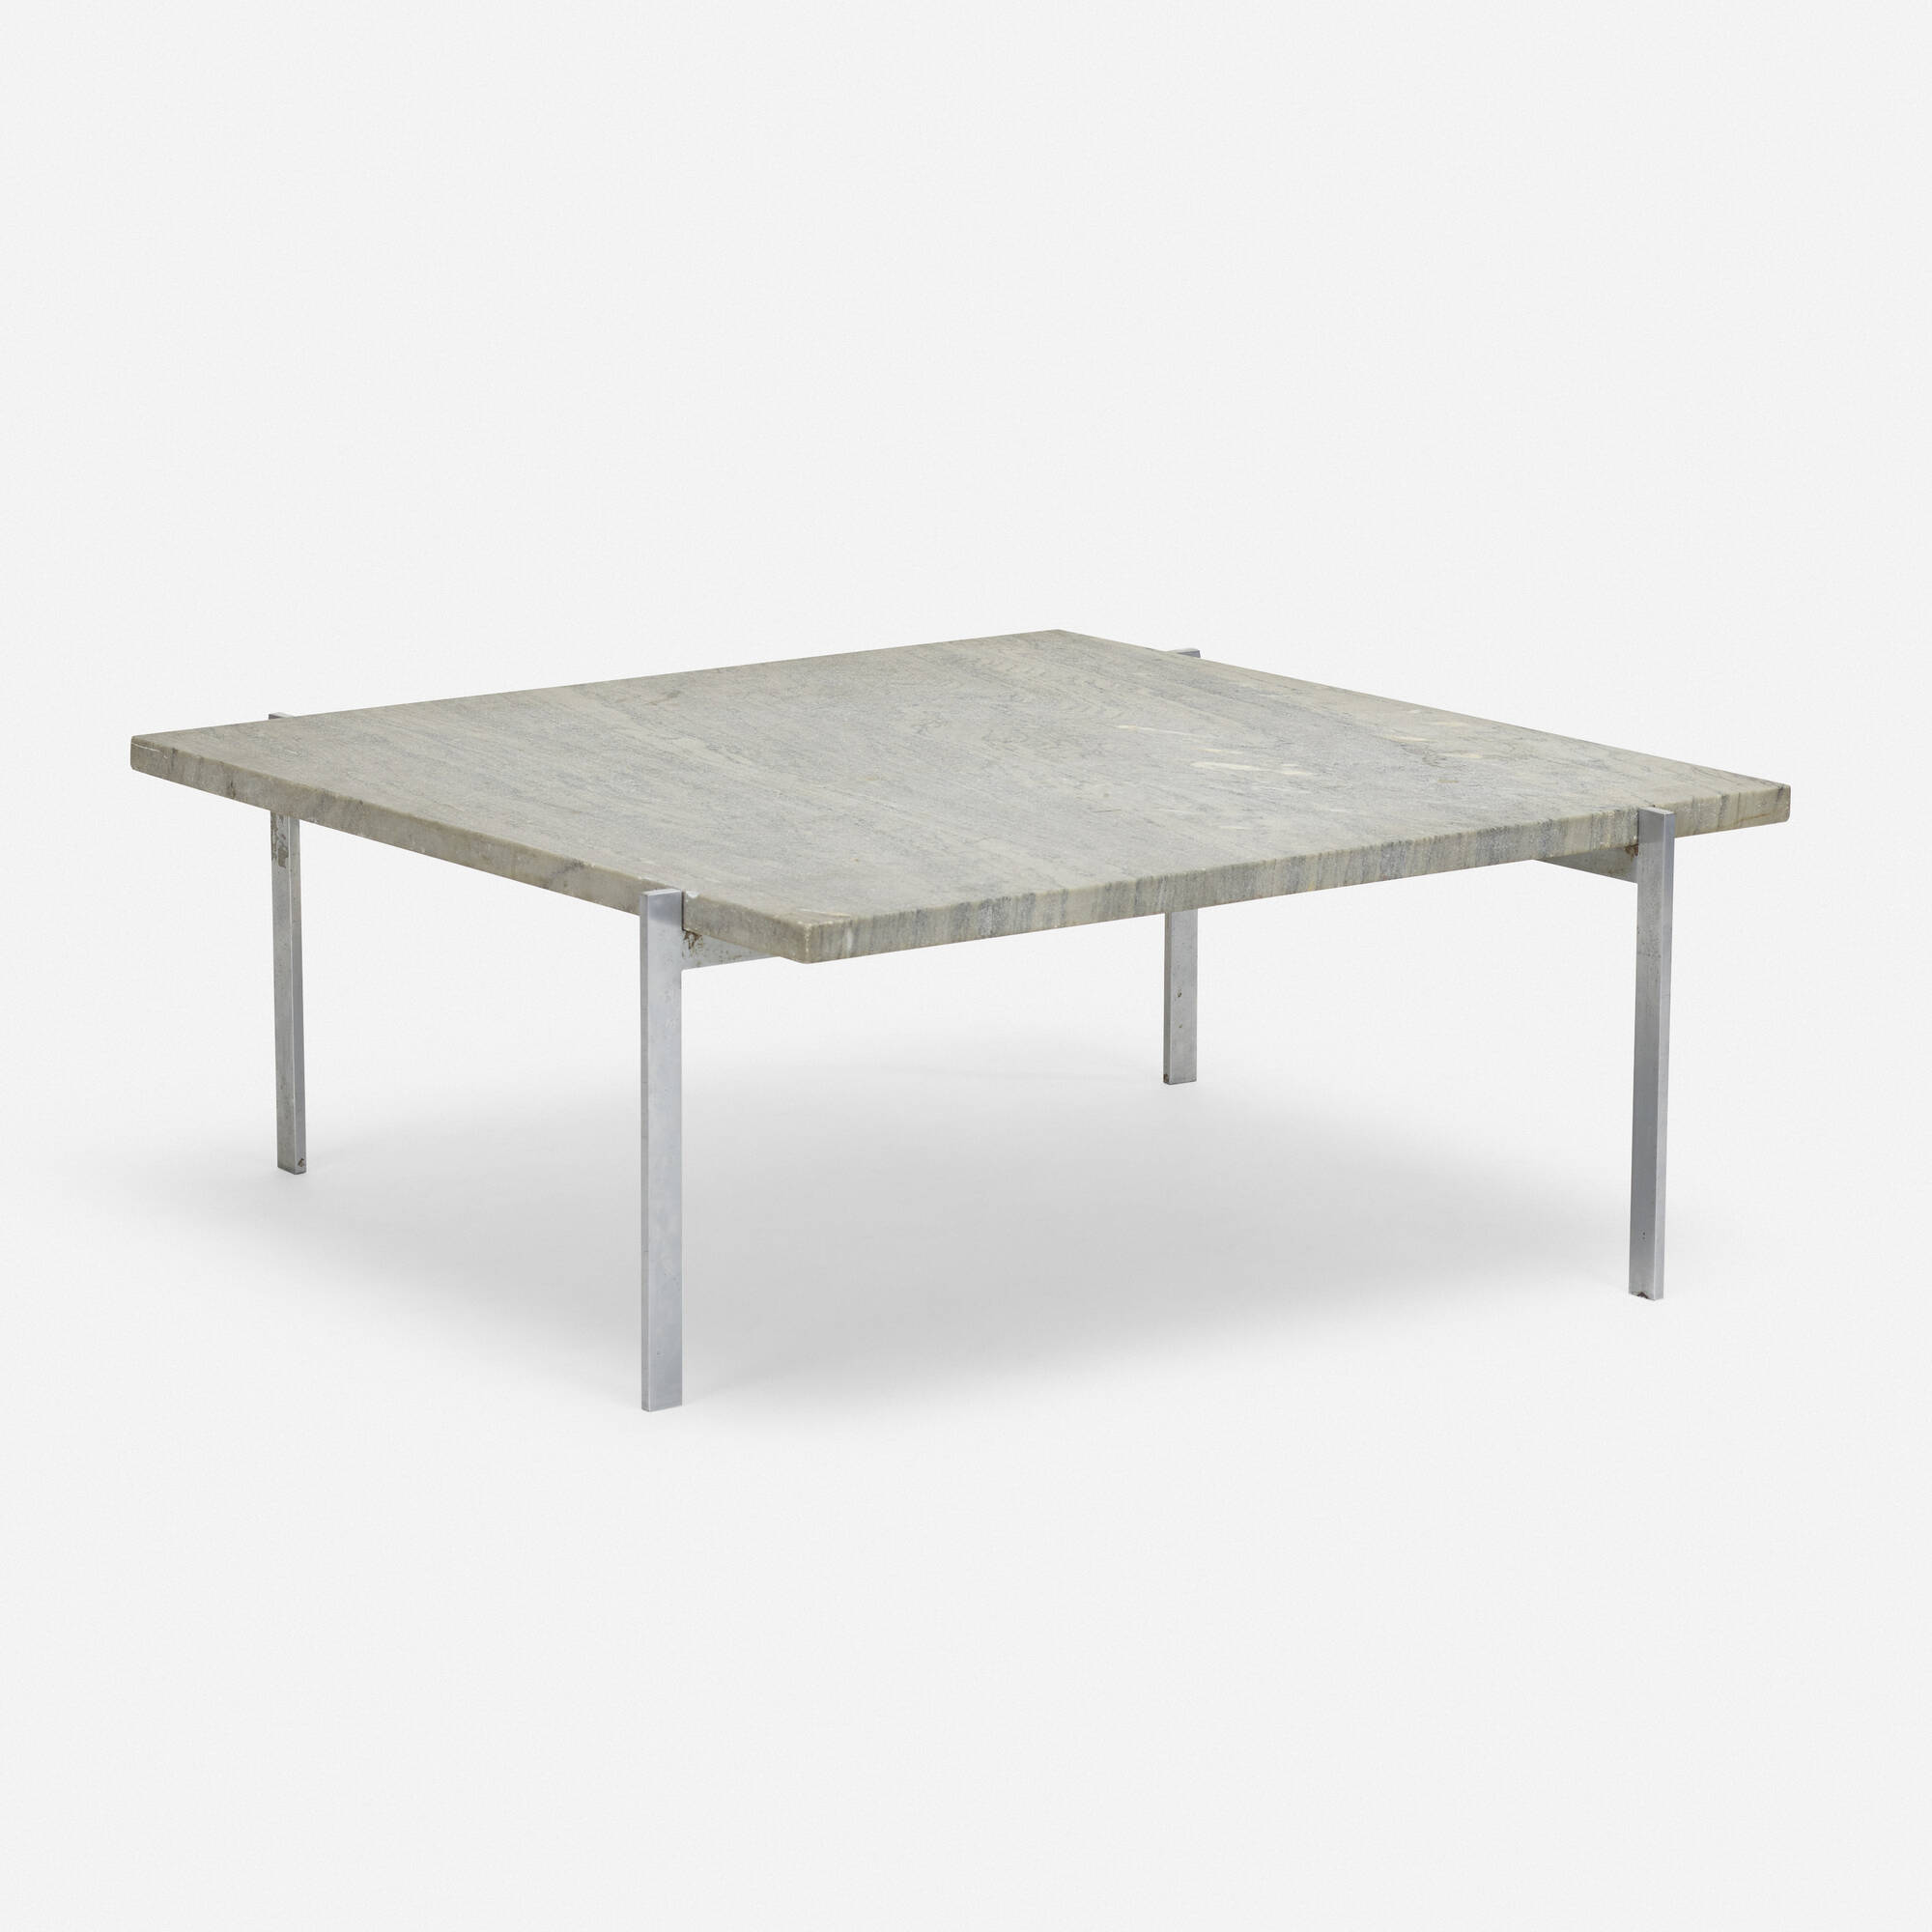 191: POUL KJAERHOLM, coffee table, model PK 61 < Design, 22 2020 < Auctions | Wright: Auctions of Art and Design